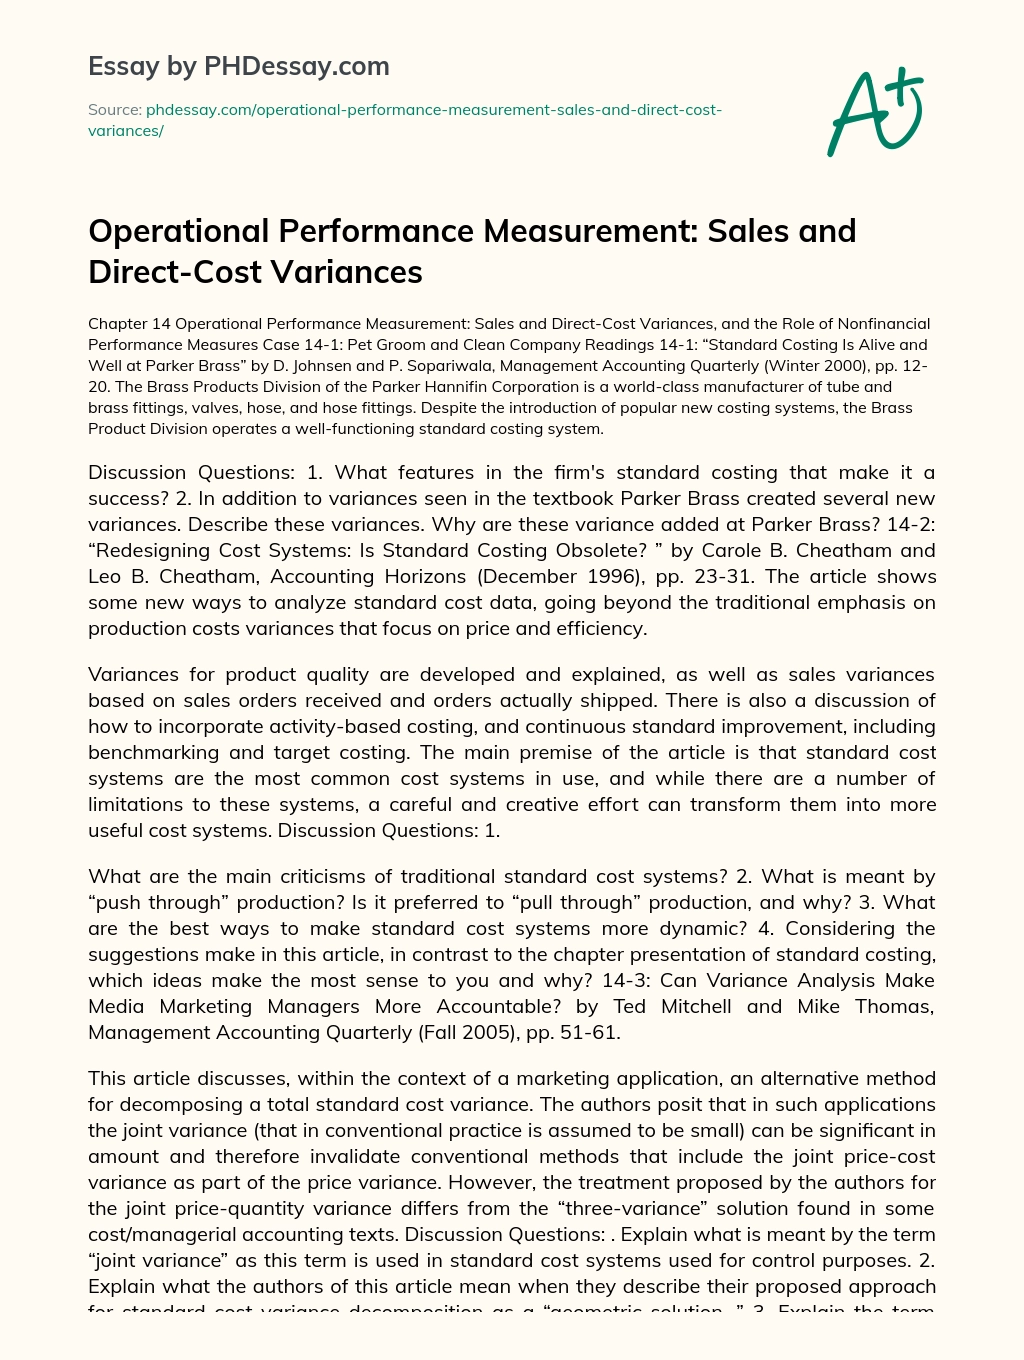 Operational Performance Measurement: Sales and Direct-Cost Variances essay